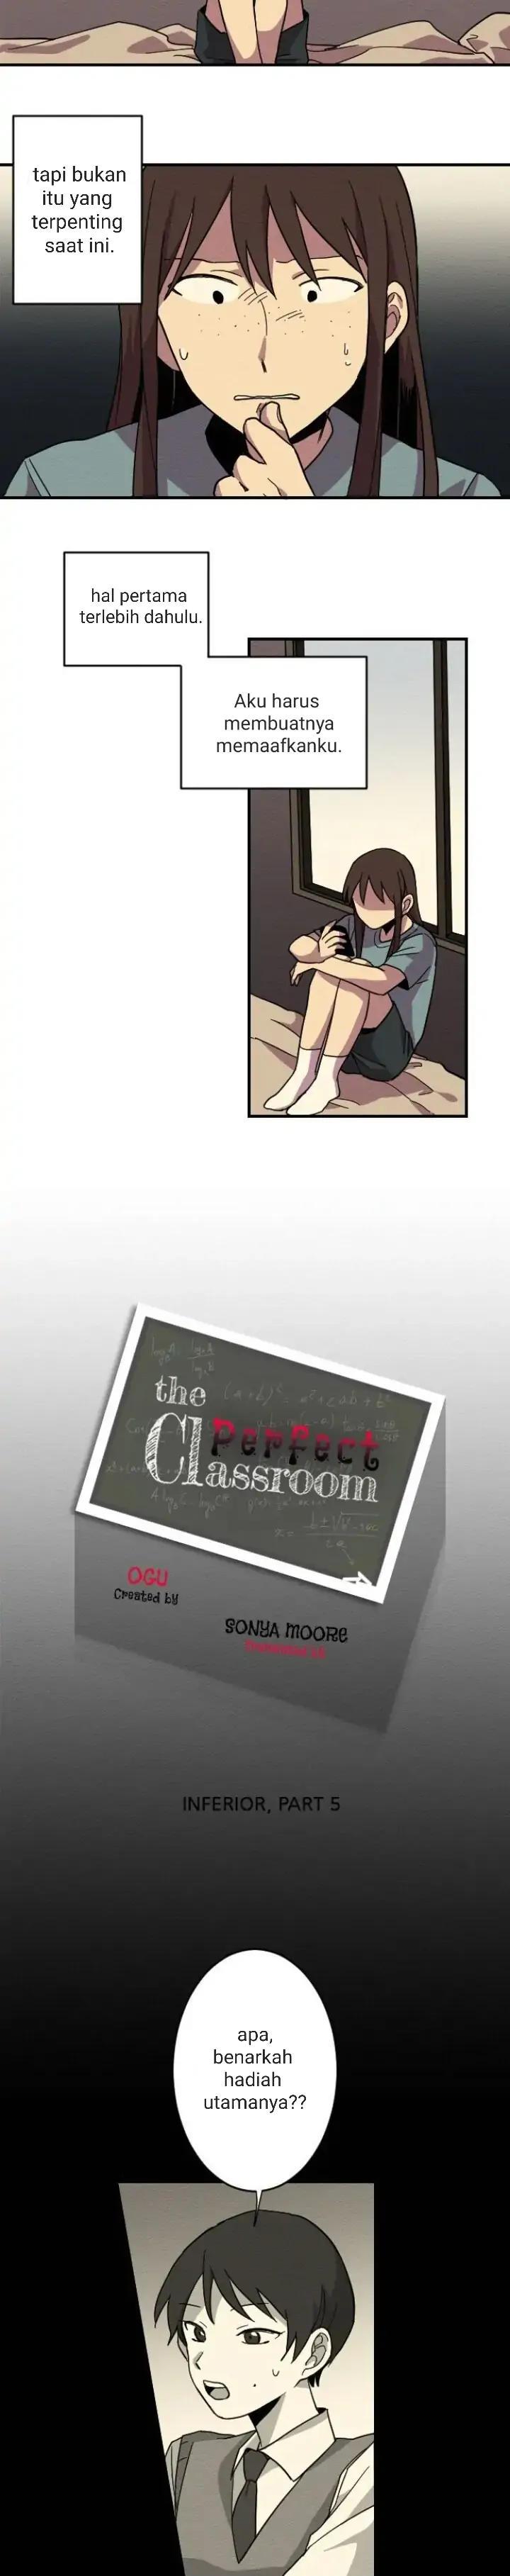 Perfect Classroom Chapter 6